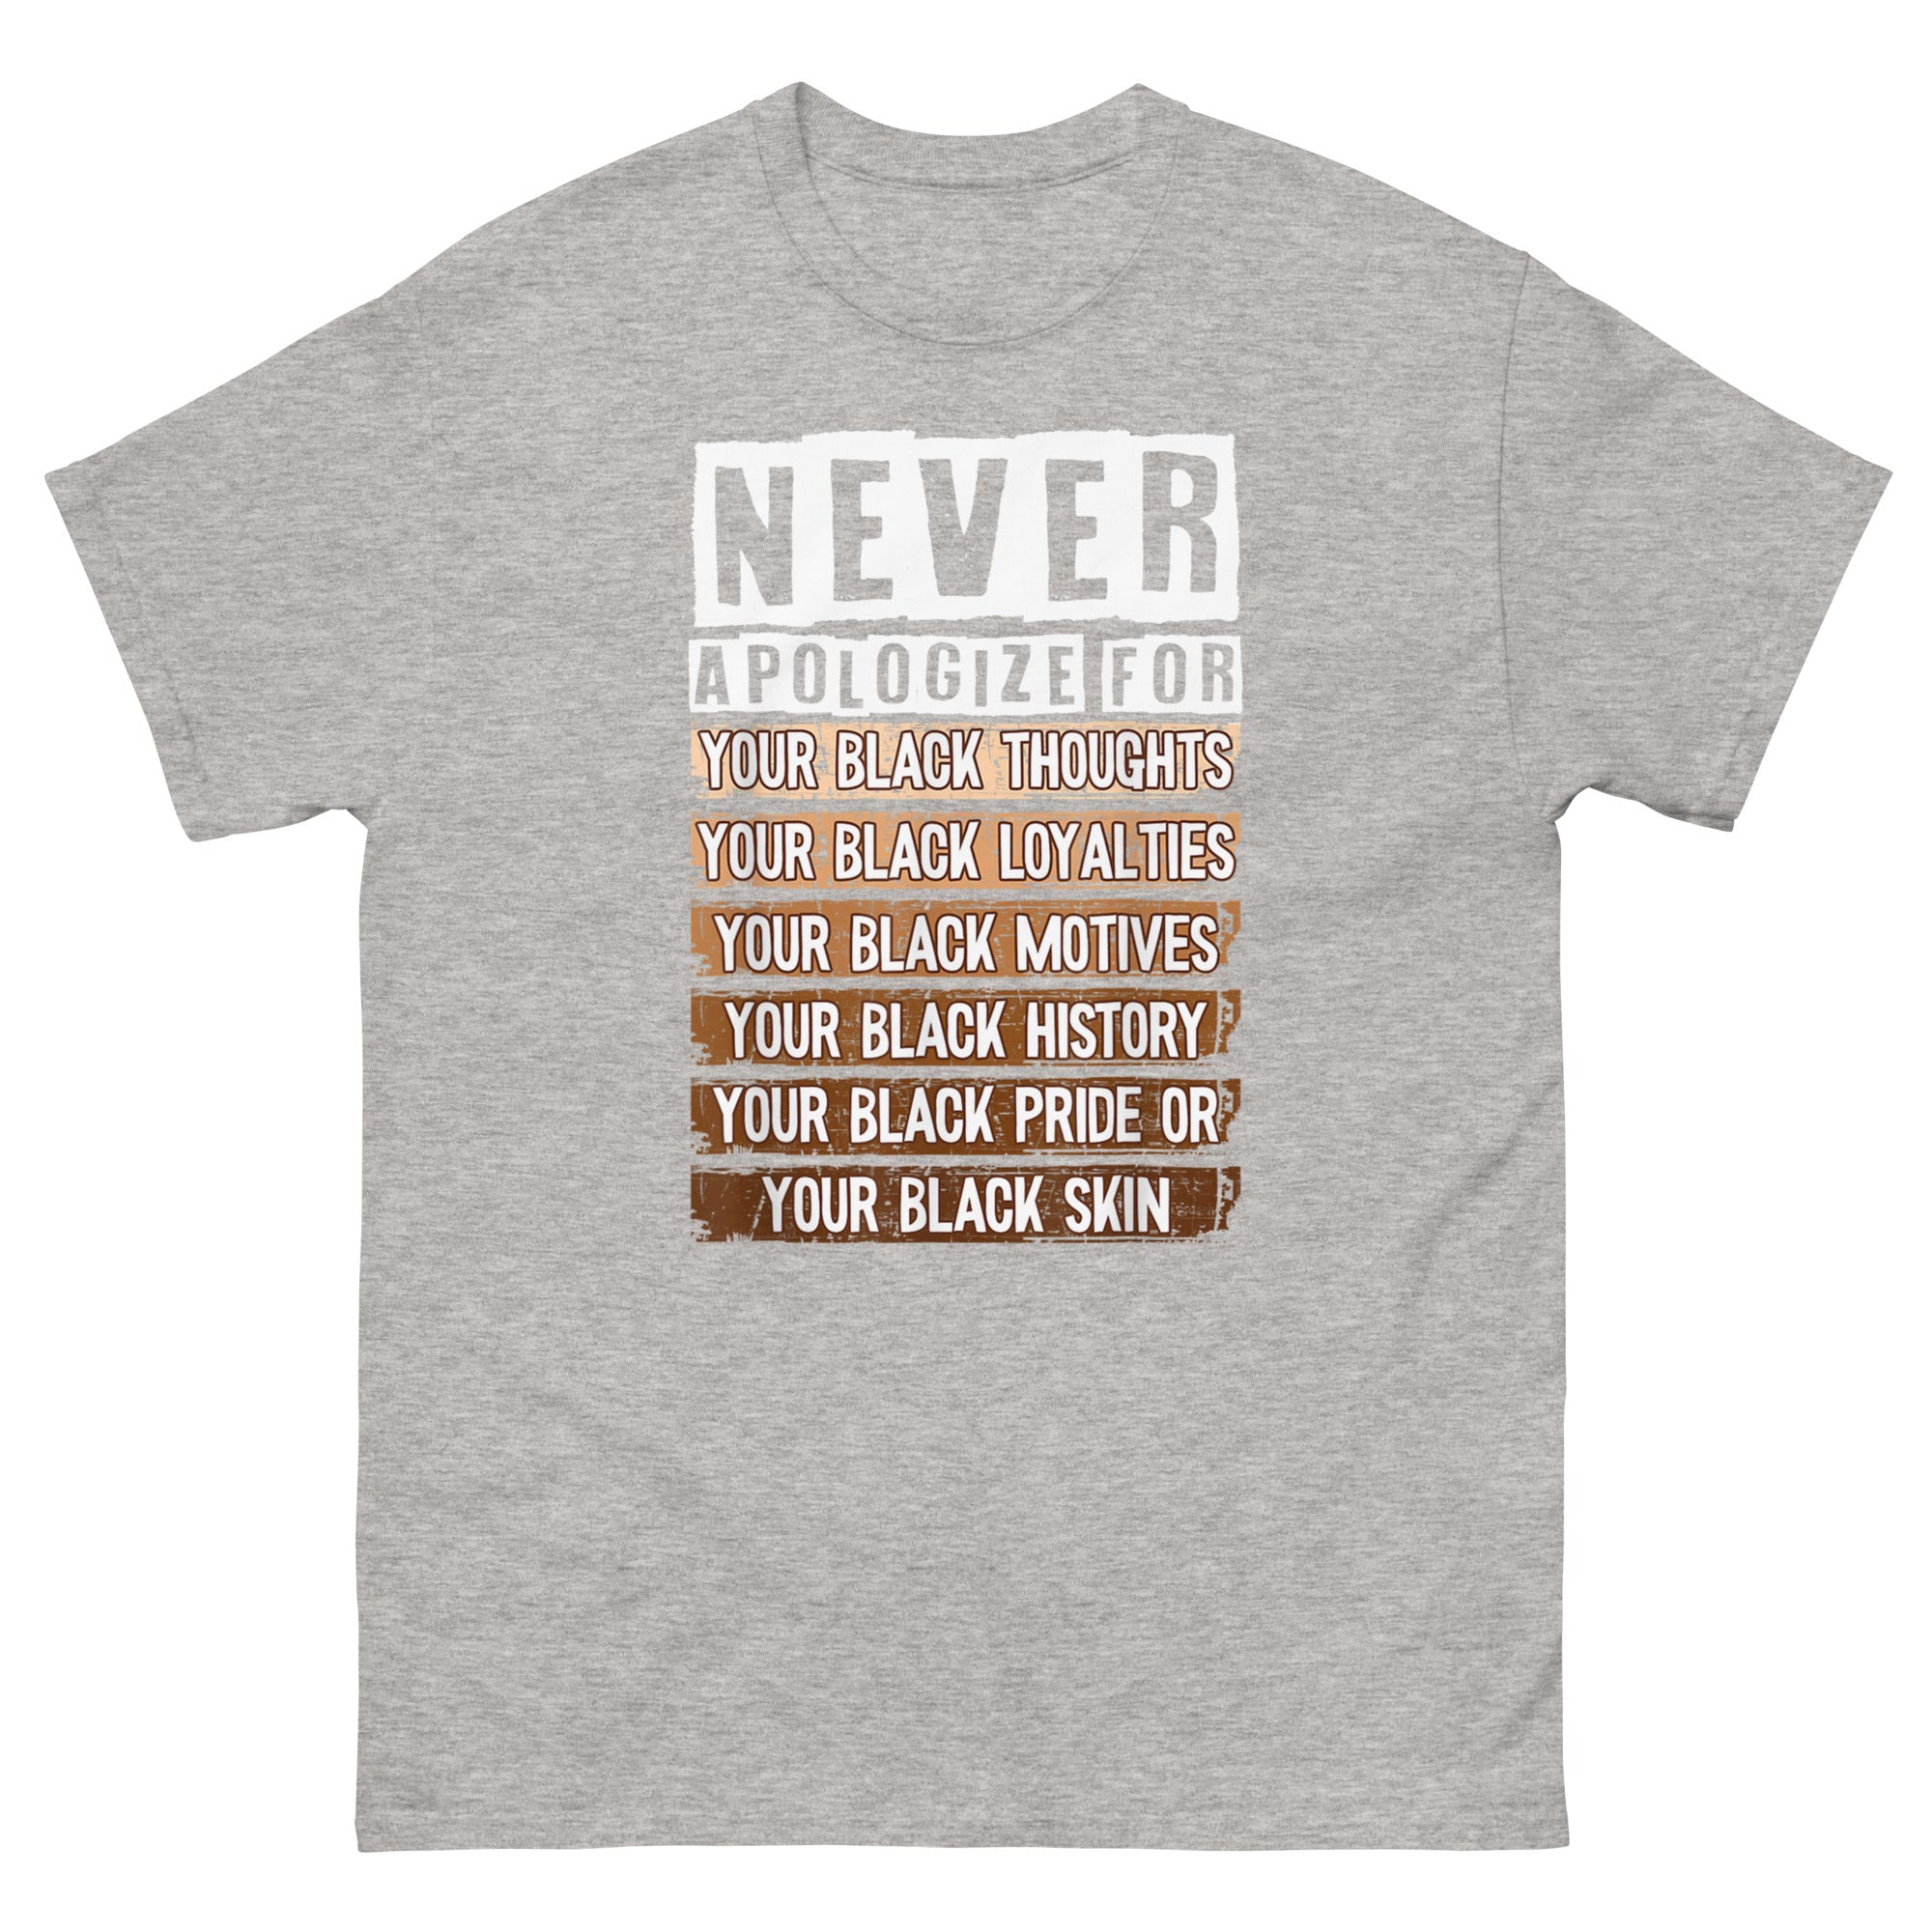 "Never Apologize" classic tee